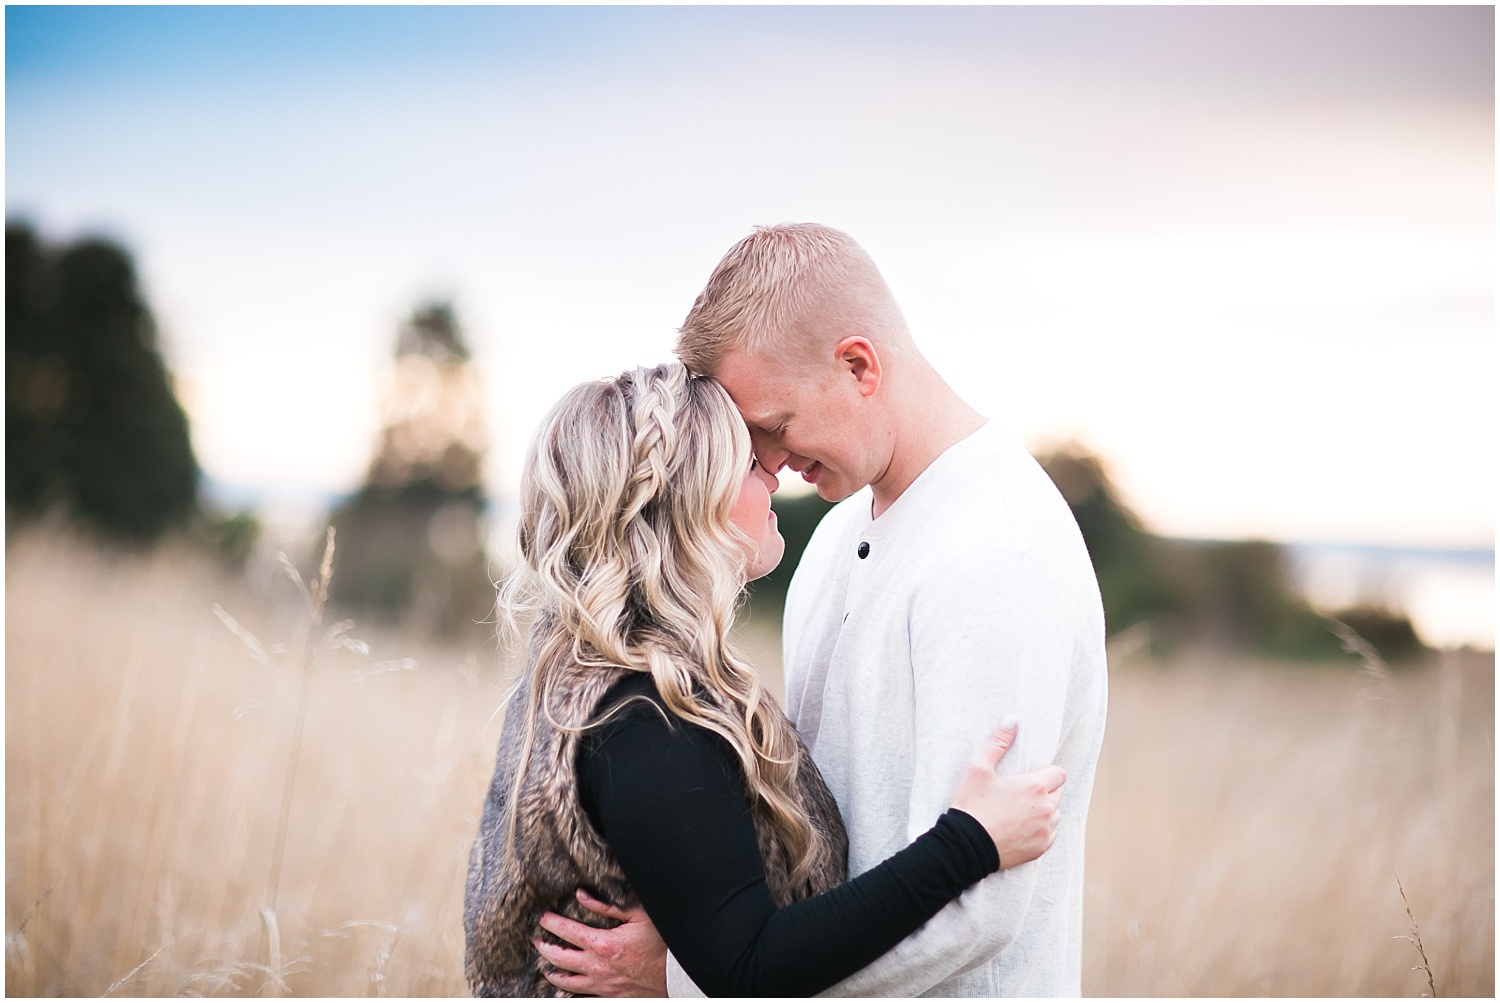 An Autumn Sunset Engagement at Discovery Park